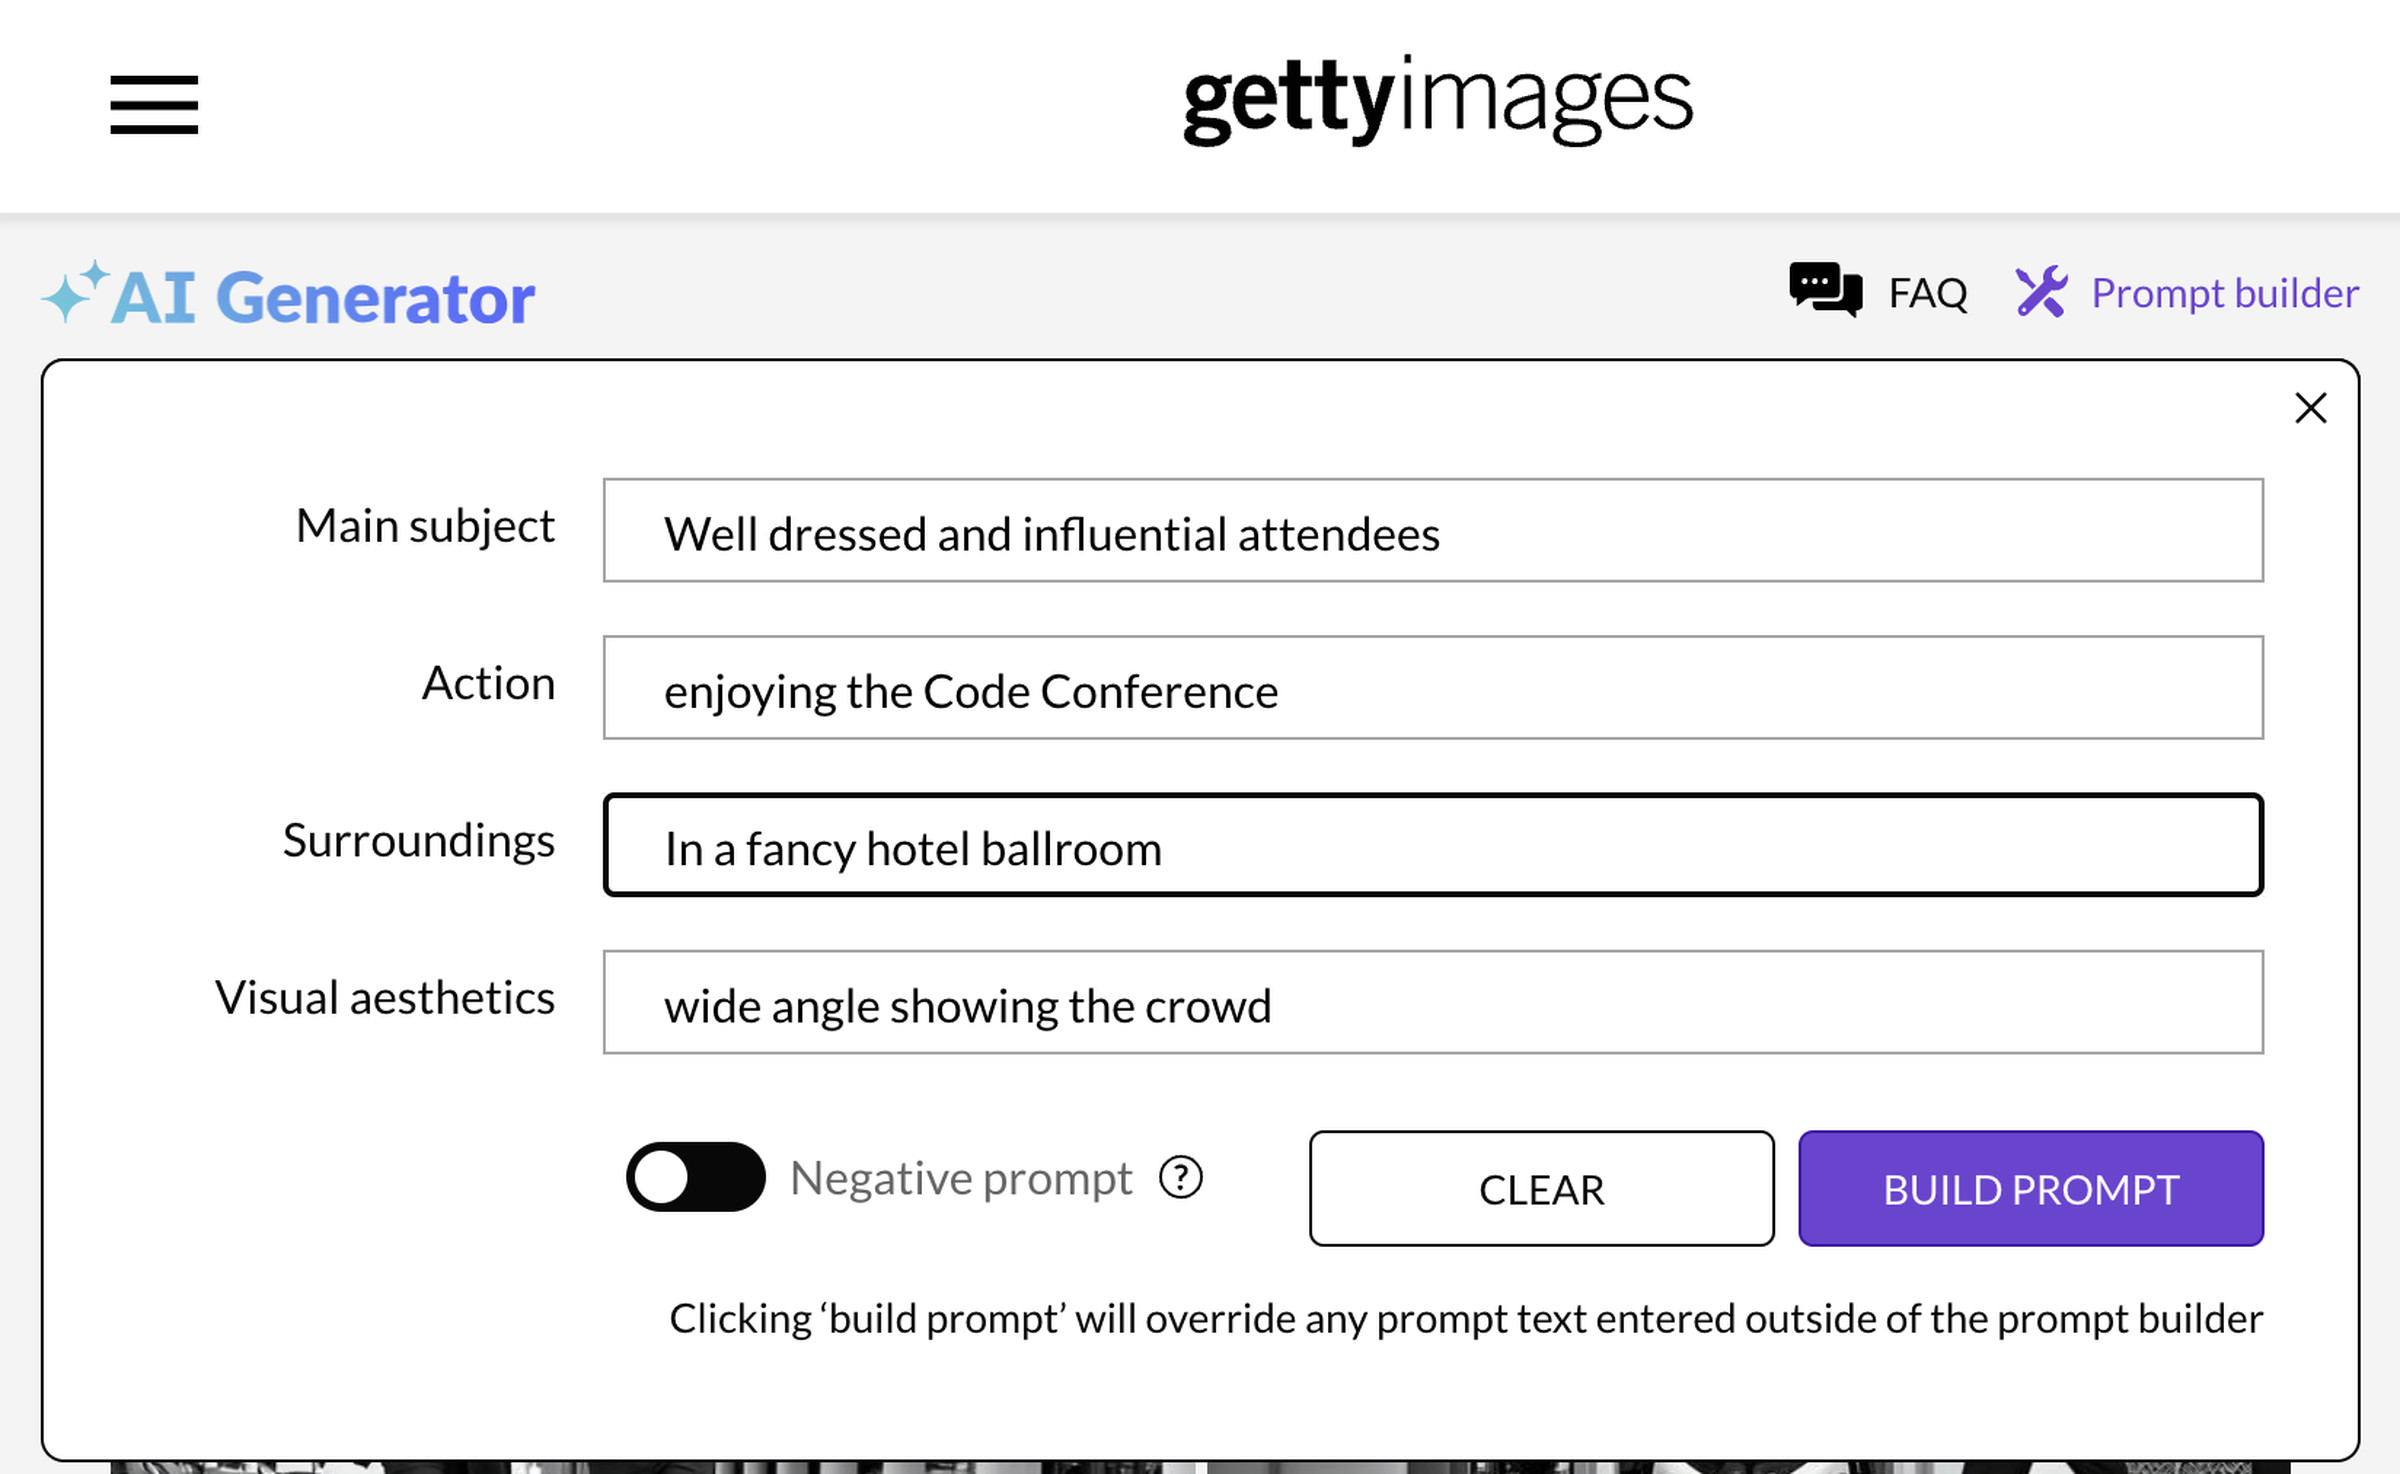 A screnshot of the Getty Images AI image generation tool, containing the prompt “well-dressed and influential attendees enjoying the Code conference in a fancy hotel ballroom.”